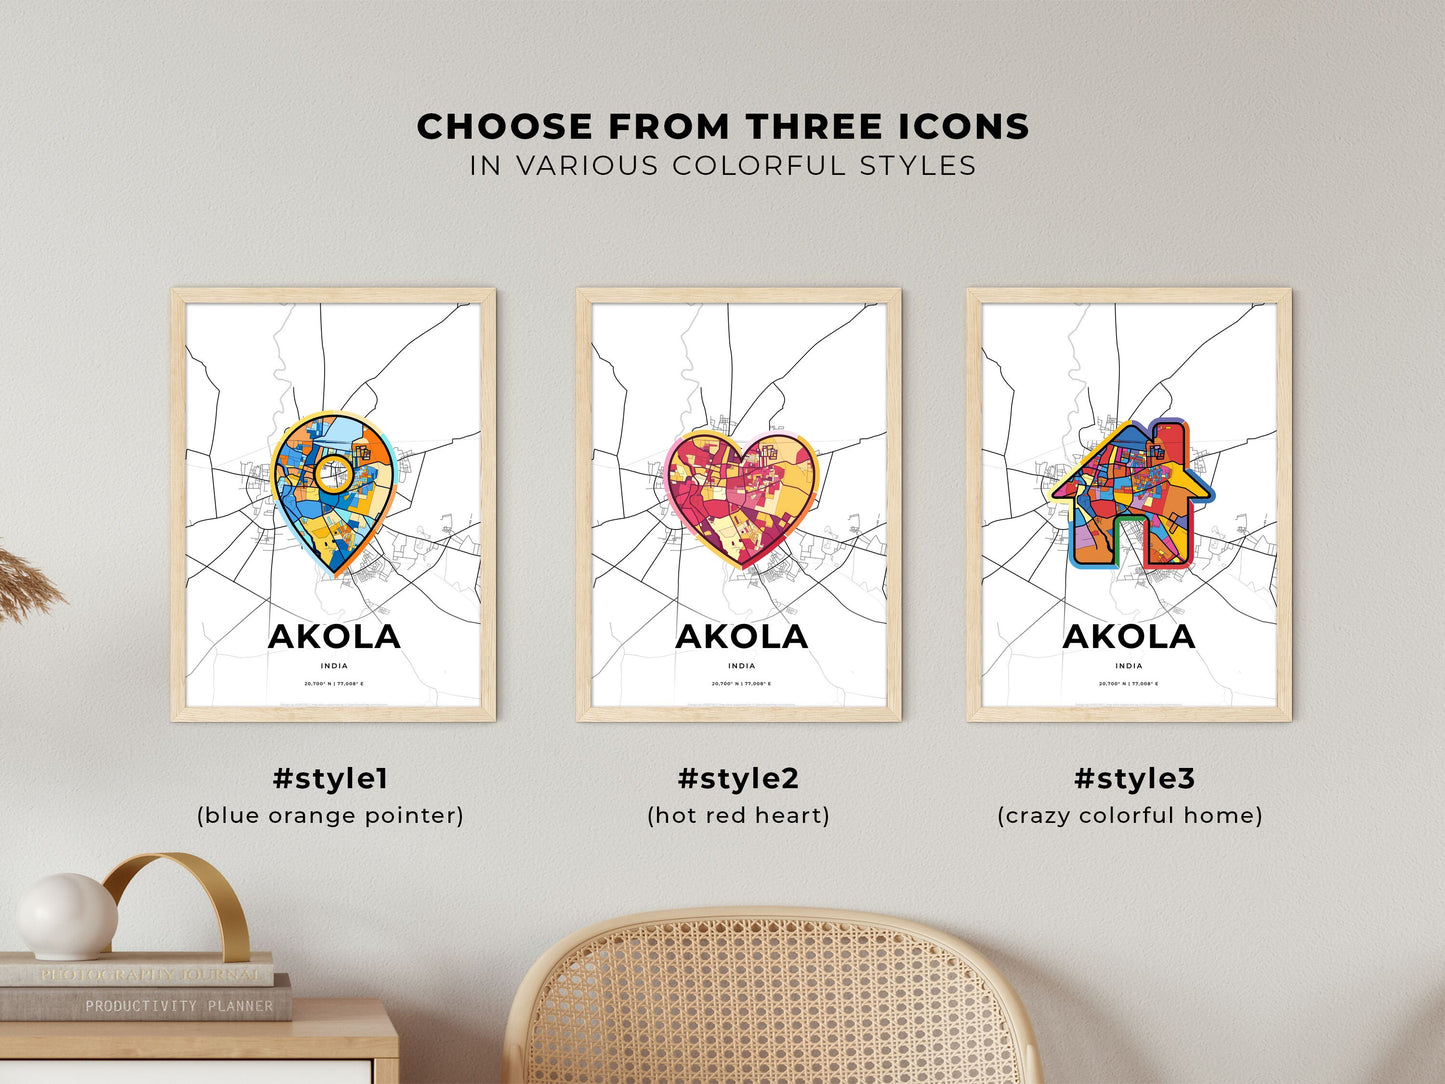 AKOLA INDIA minimal art map with a colorful icon. Where it all began, Couple map gift.